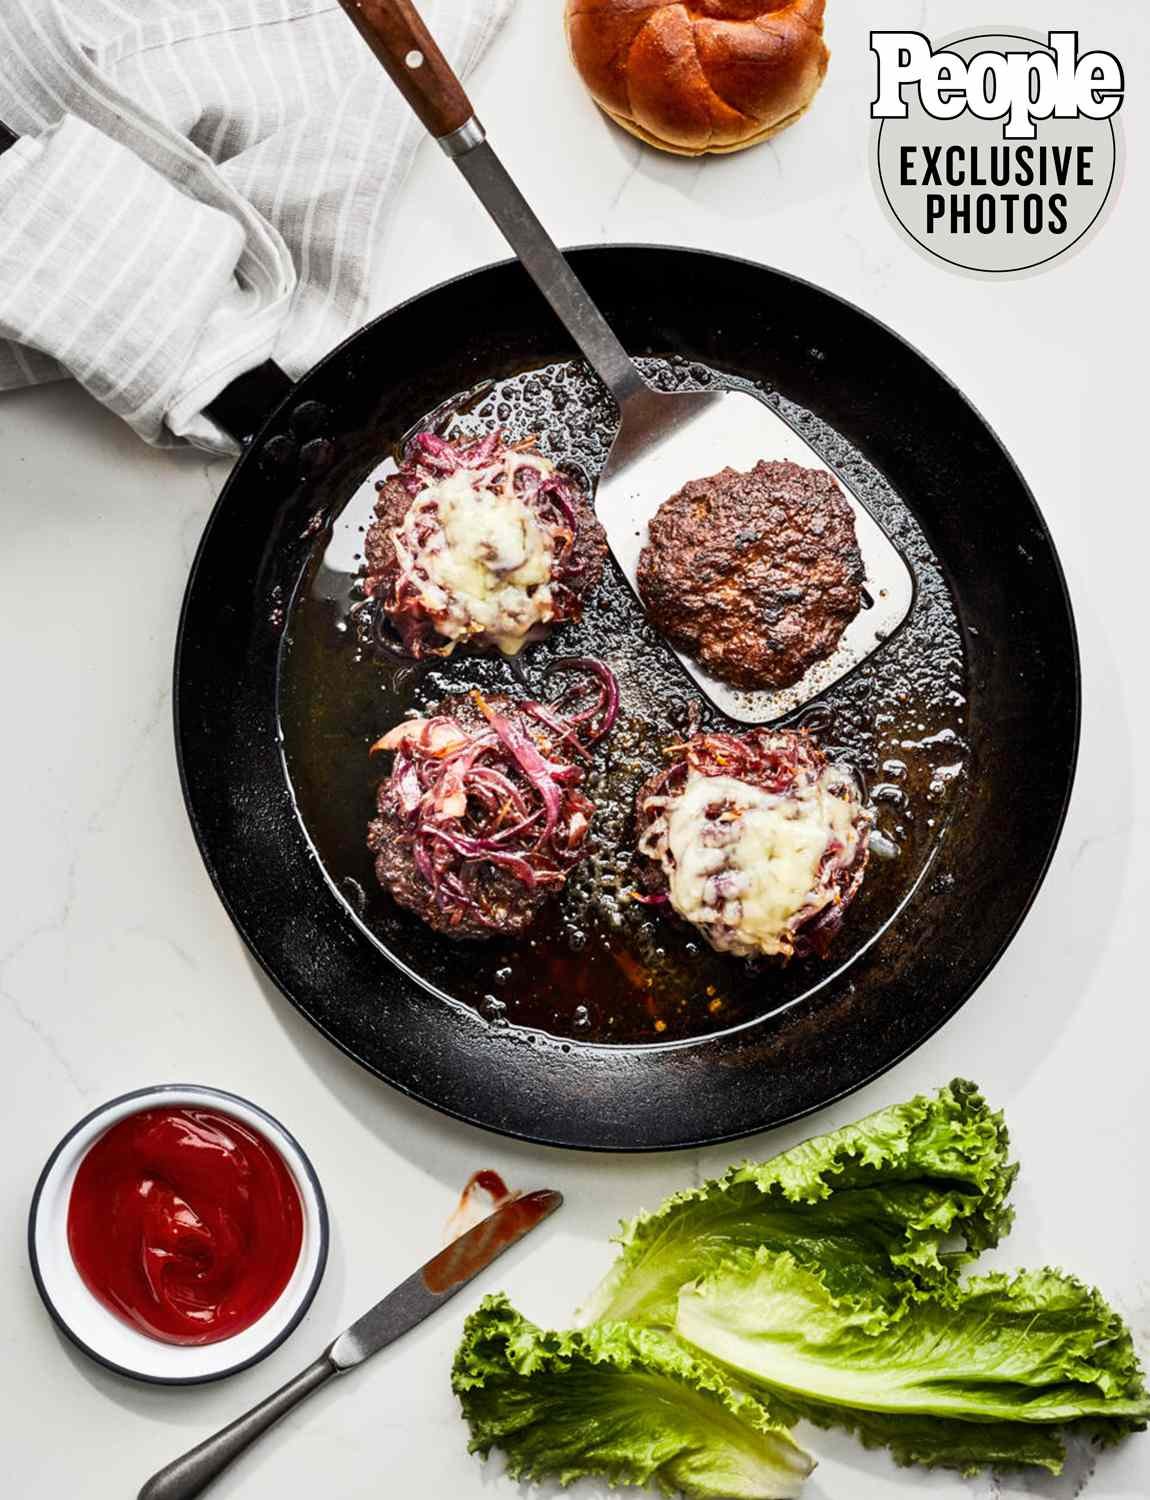 Ina Garten's Smashed Burgers with Caramelized Onions Recipe